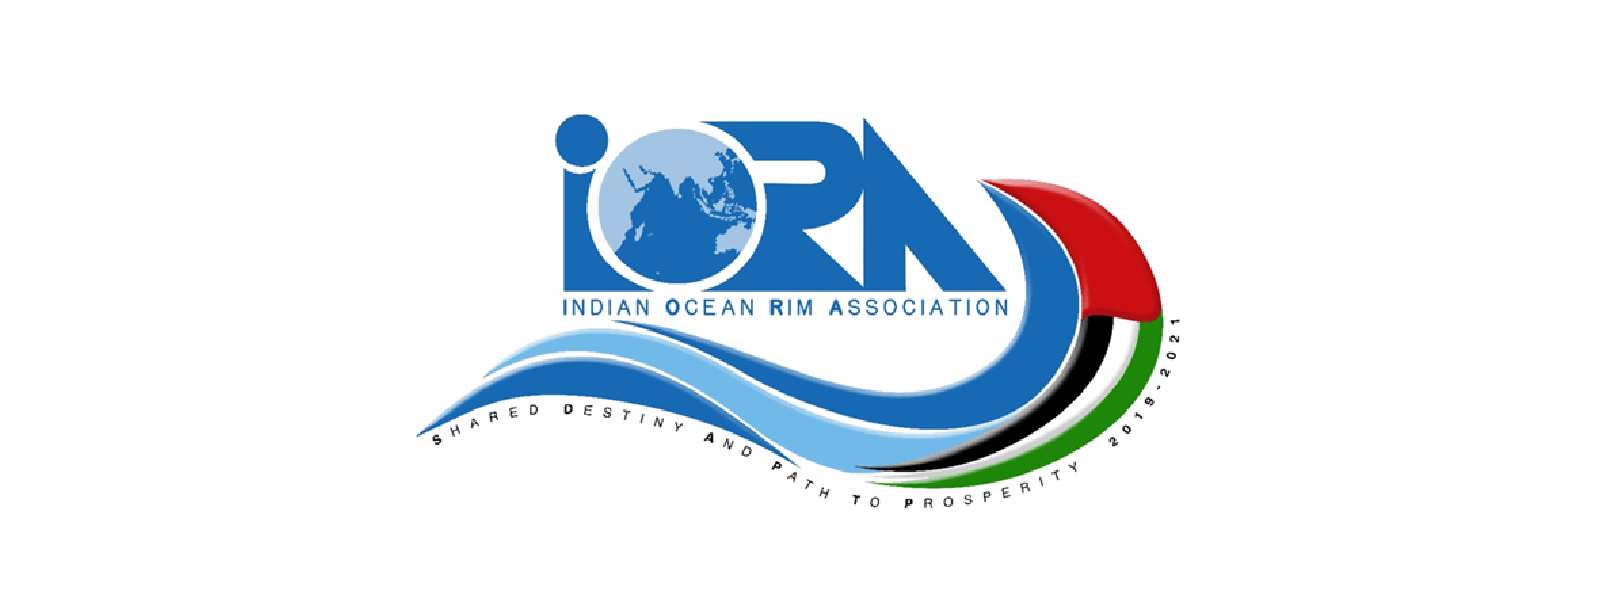 Sri Lanka to chair IORA for the second time